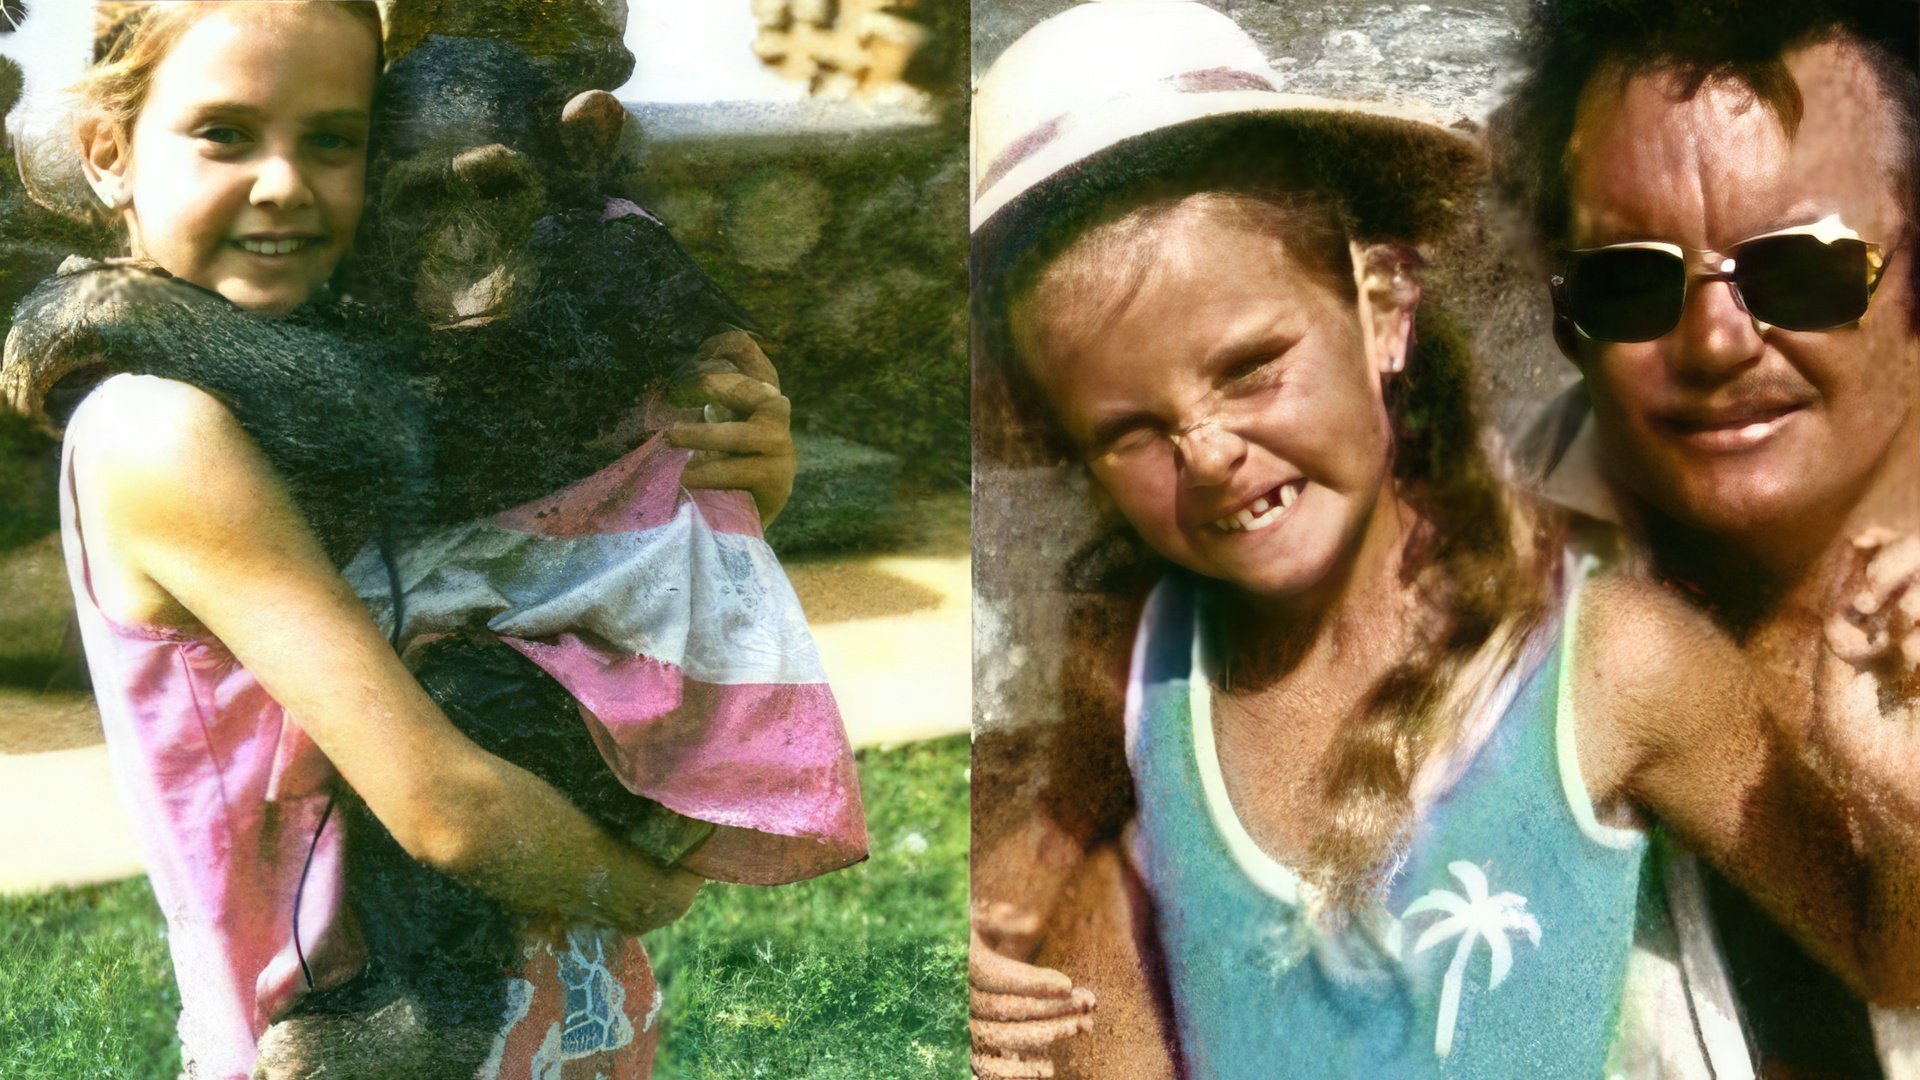 Charlize Theron childhood photos depicting her carefree tears at the family farm